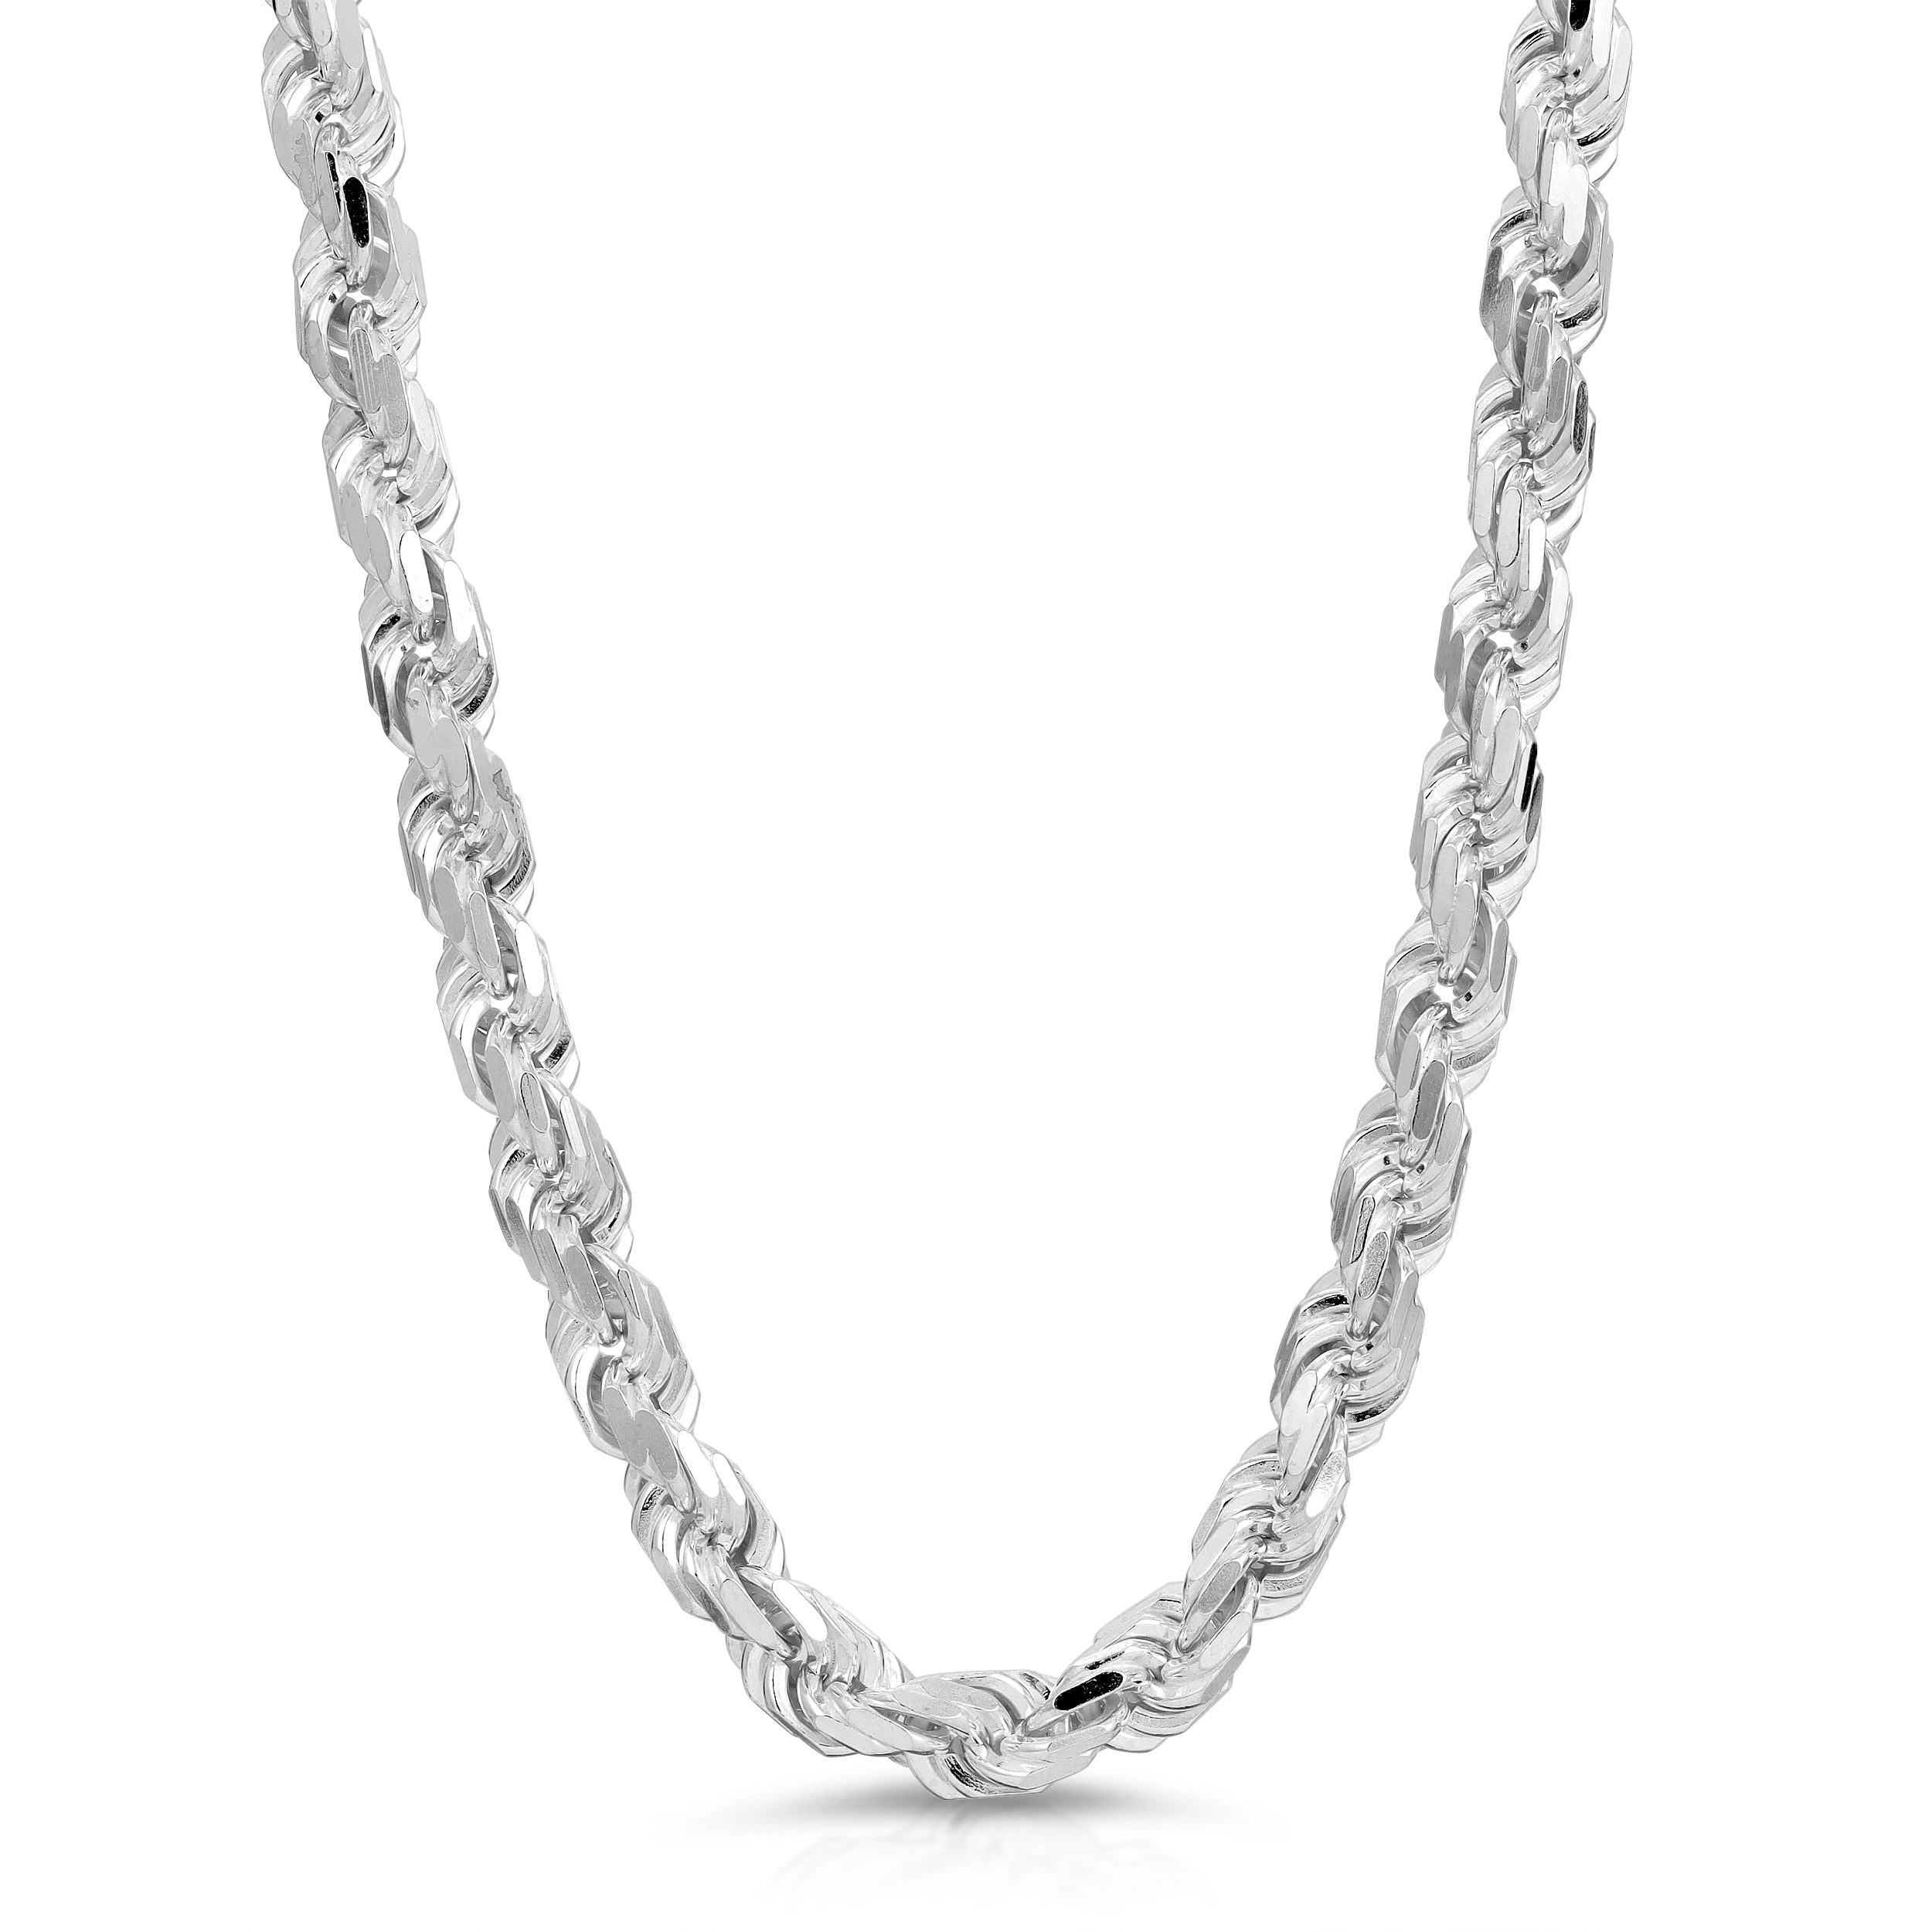 8mm rope chain silver 925